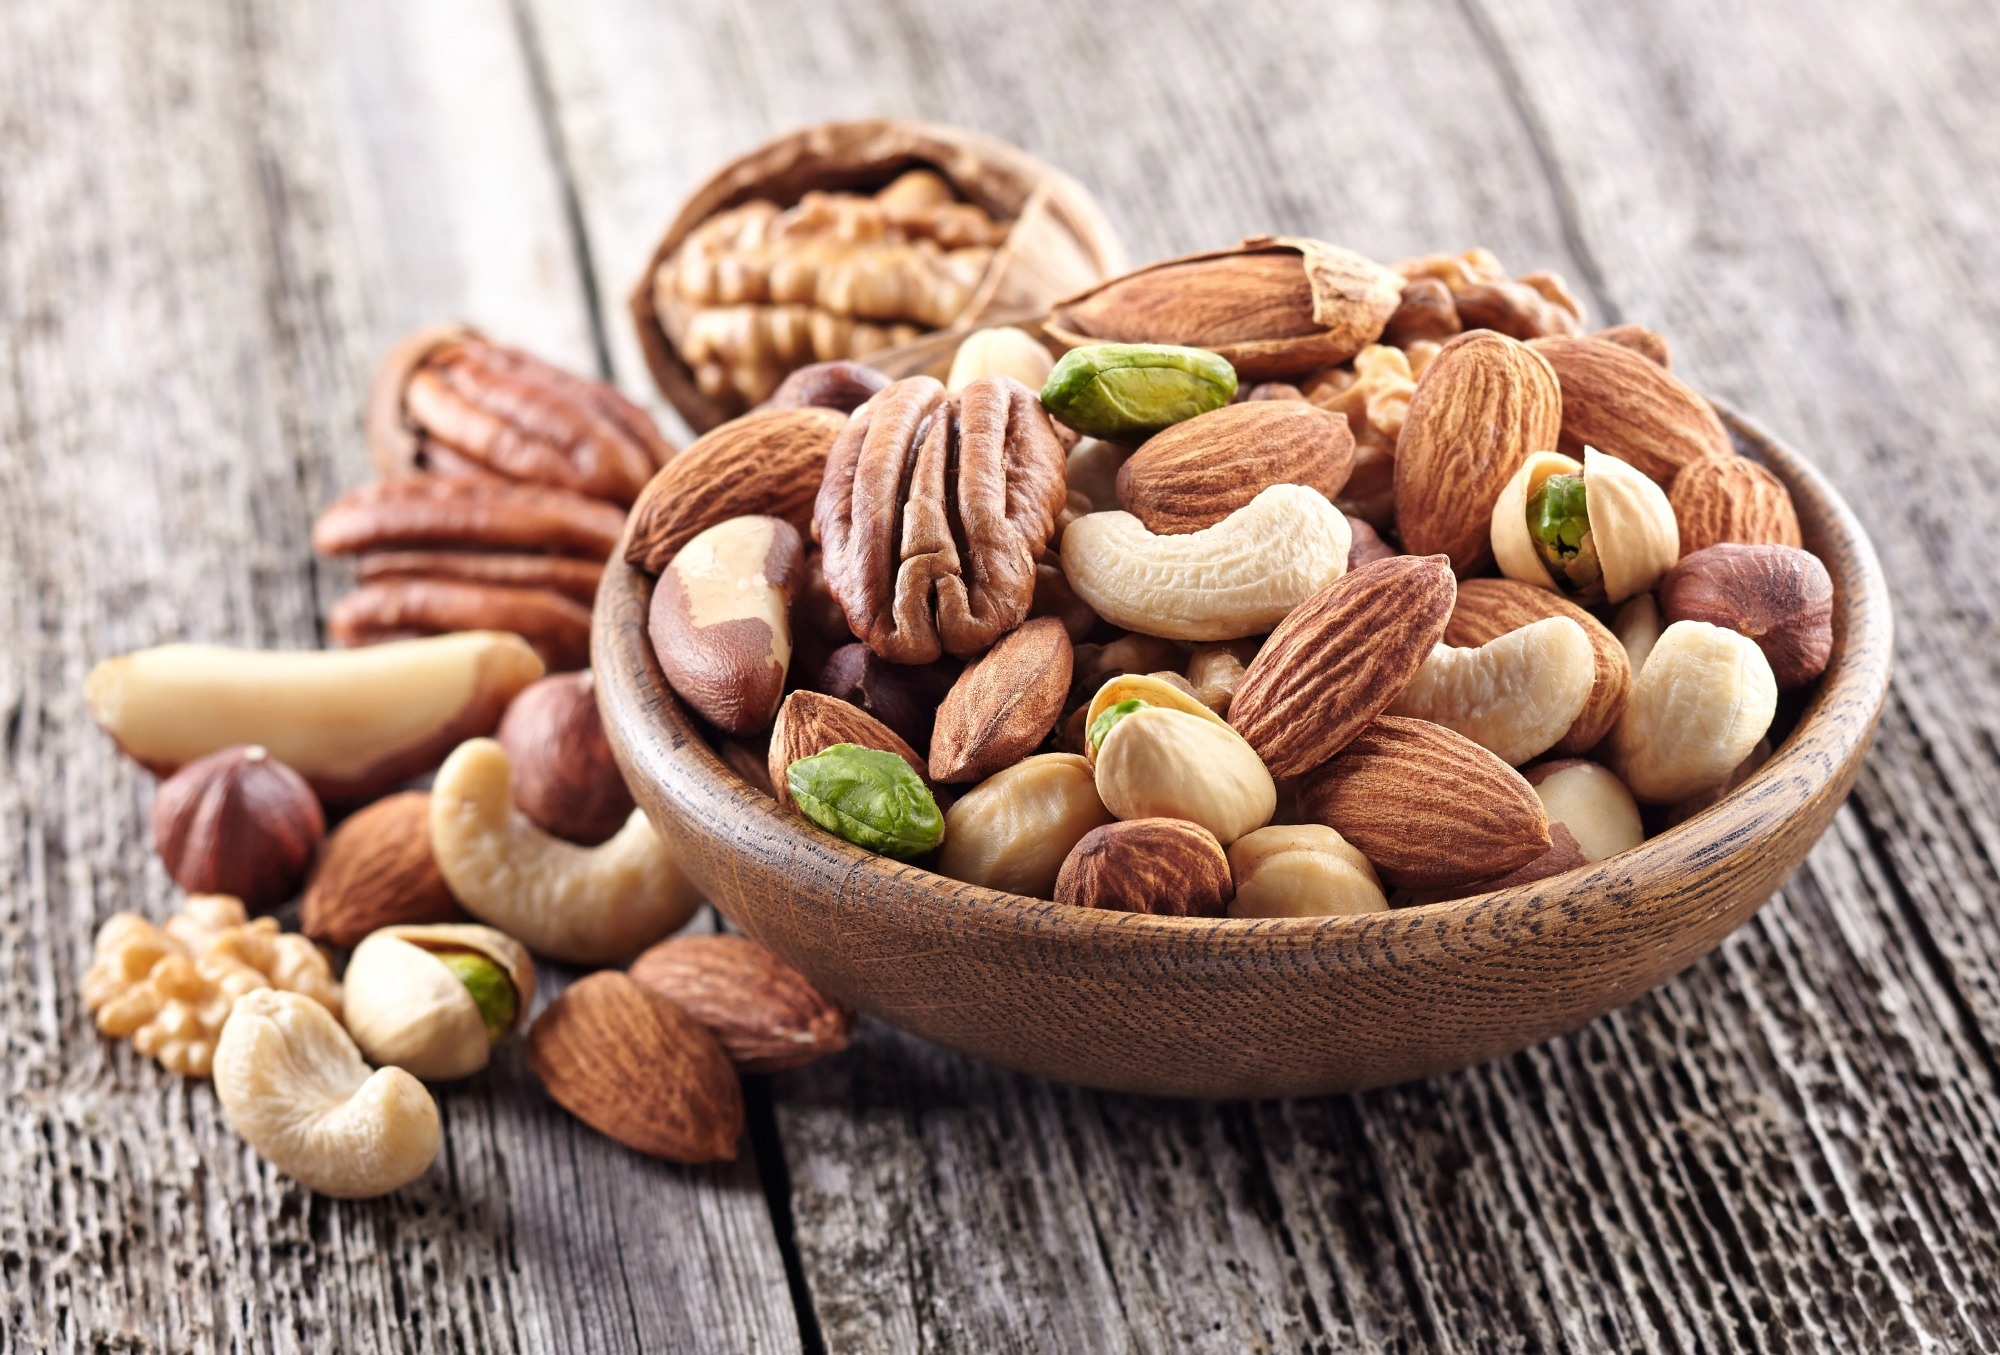 Study: Long-Term Consumption of Nuts (Including Peanuts, Peanut Butter, Walnuts, and Other Nuts) in Relation to Risk of Frailty in Older Women: Evidence from a Cohort Study. Image Credit: Dionisvera/Shutterstock